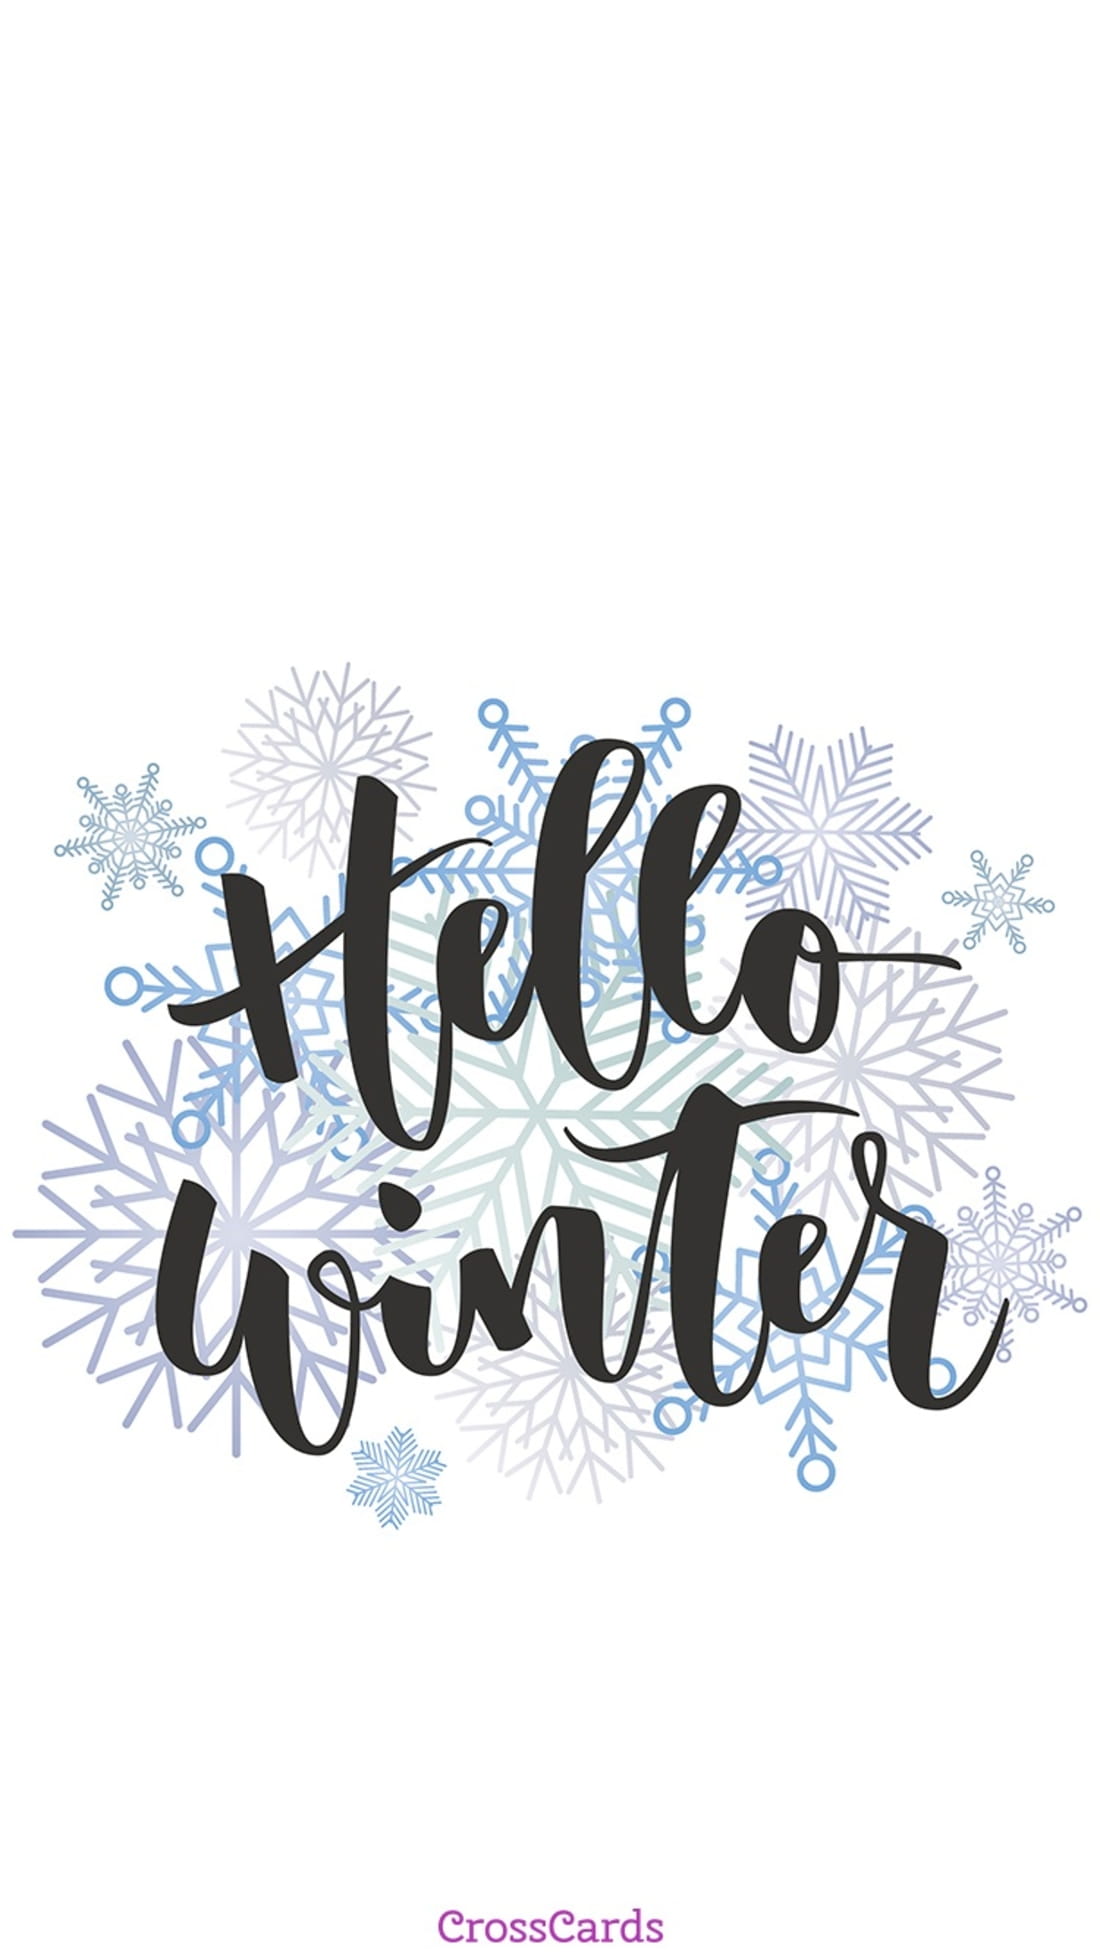 Hello Winter Wallpaper and Mobile Background